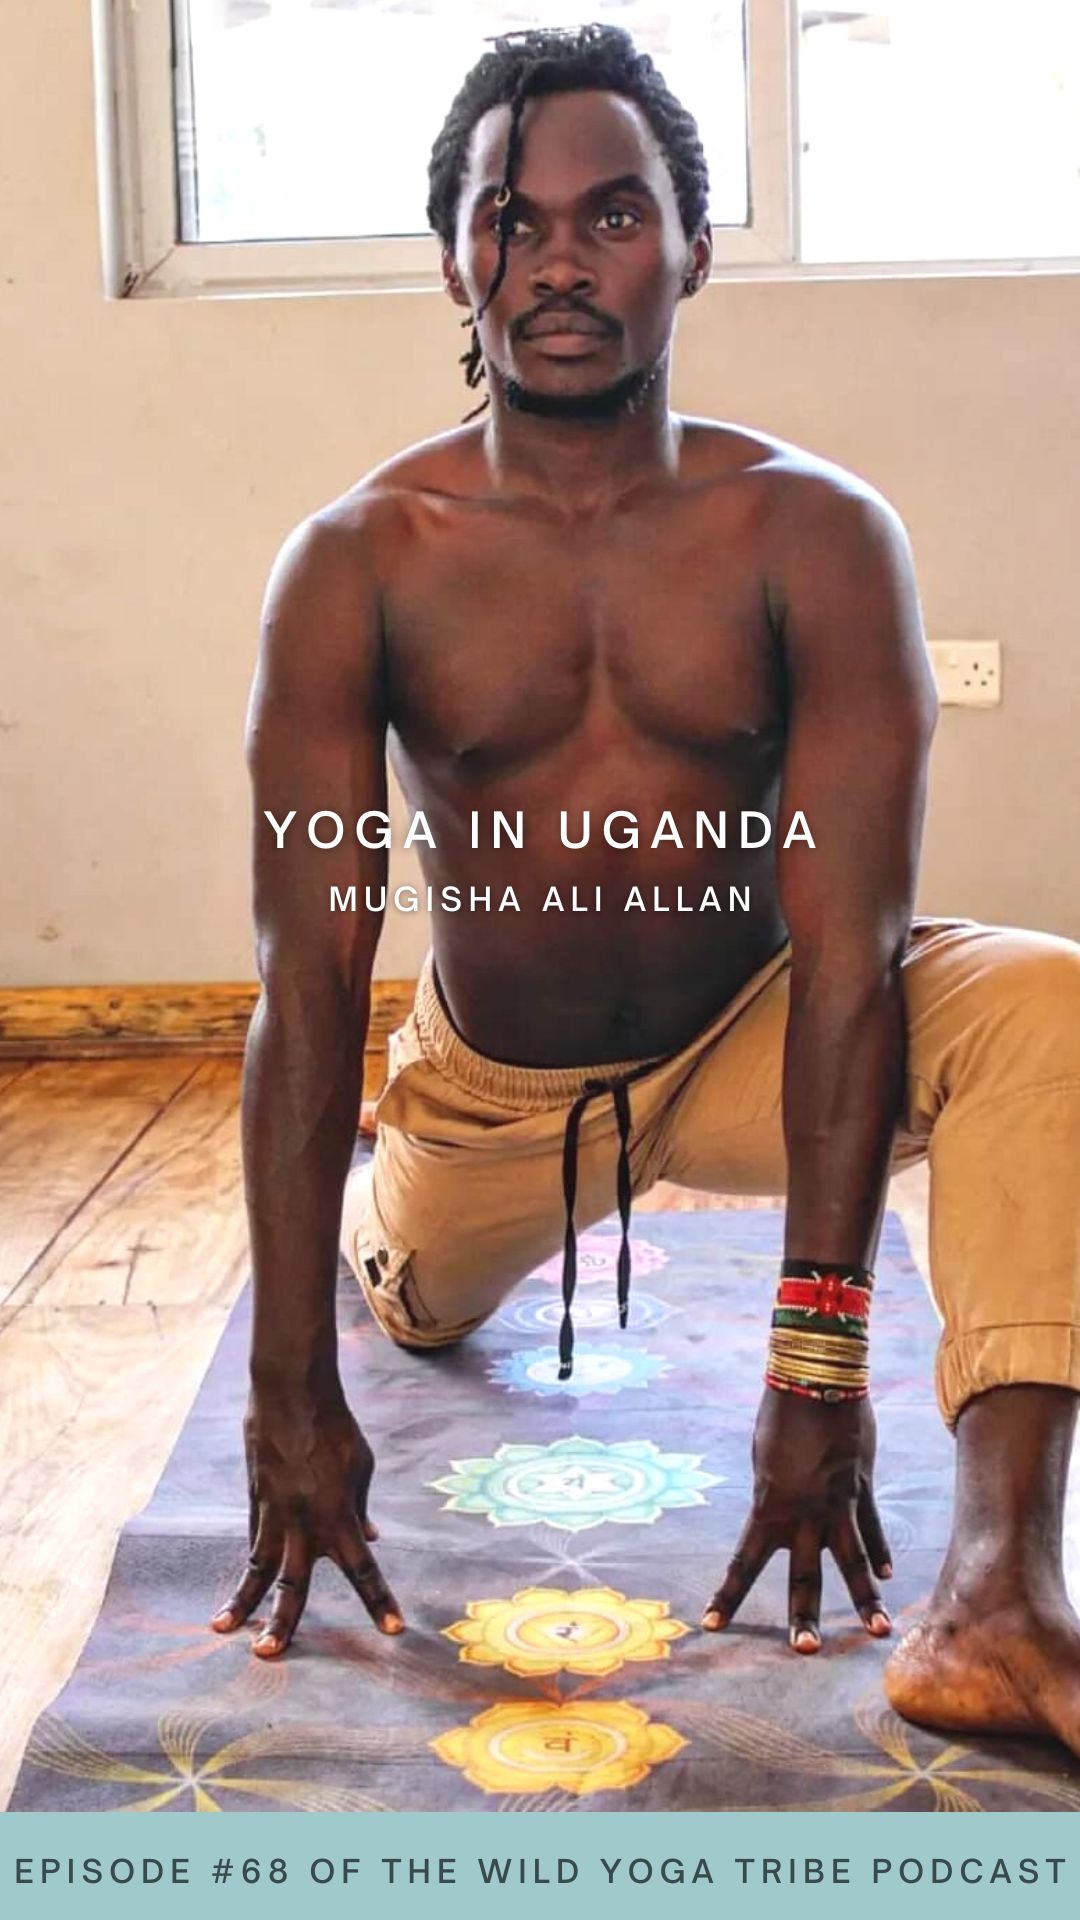 Meet Mugisha Ali Allan, a yoga teacher from Uganda who shares with us his passion and dedication for serving his community, and local NGOs through yoga. Welcome to yoga in Uganda!